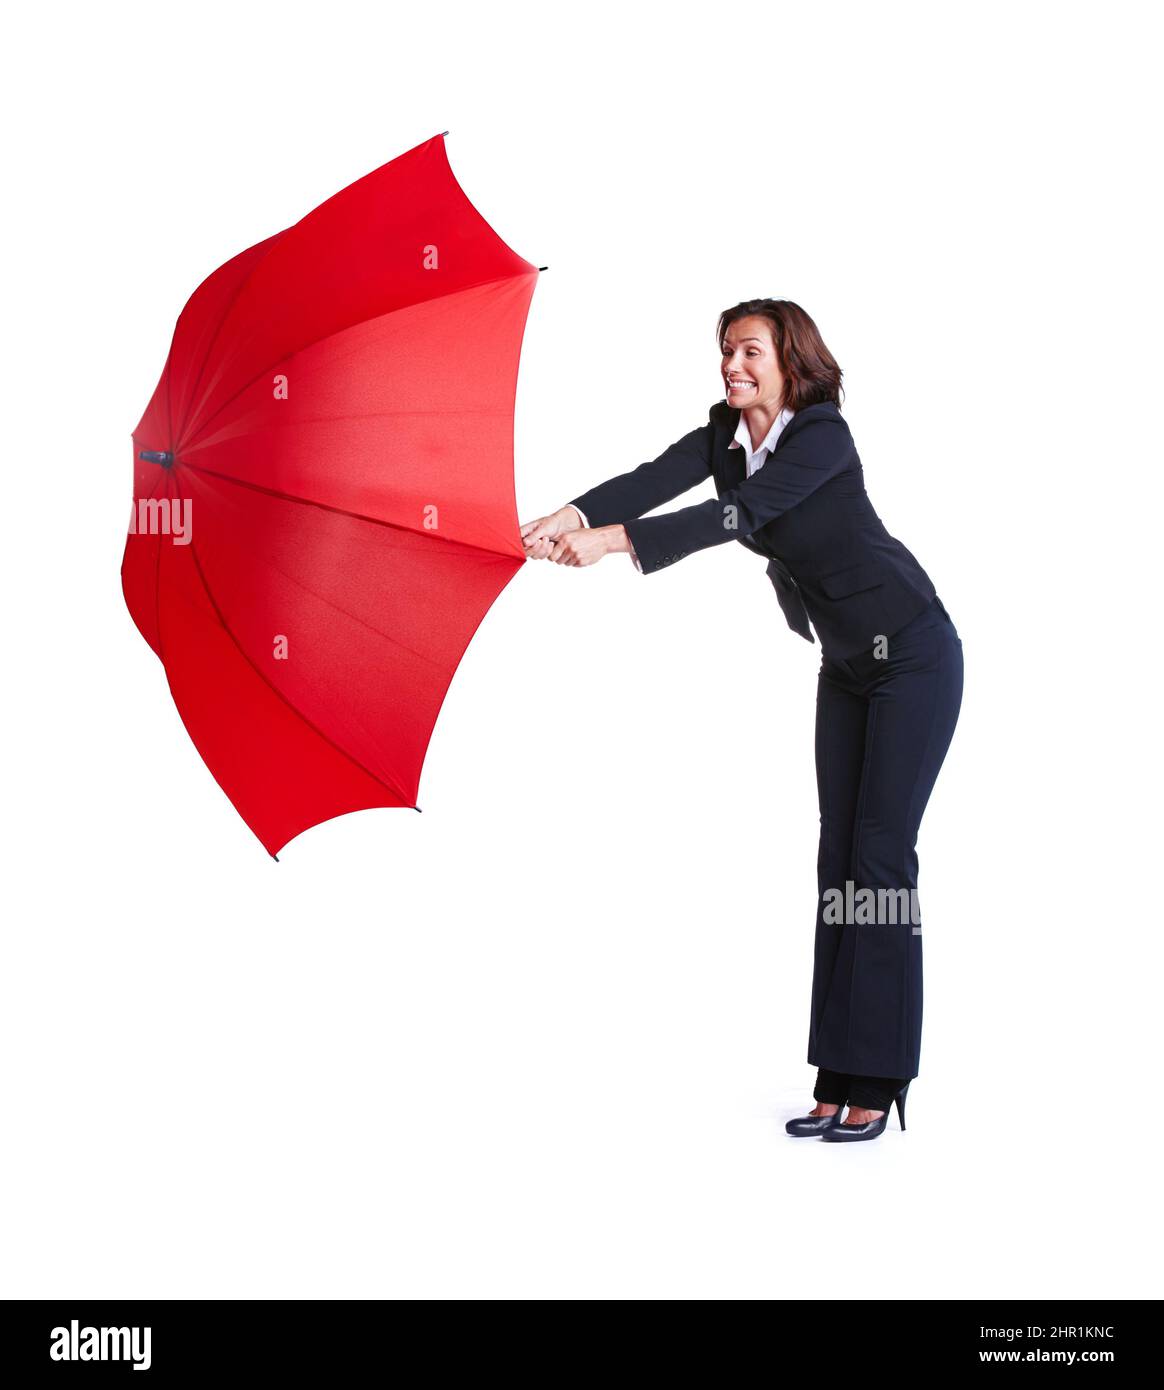 The winds caught in my umbrella. Full length studio shot of a businesswoman leaning out while holding an umbrella. Stock Photo